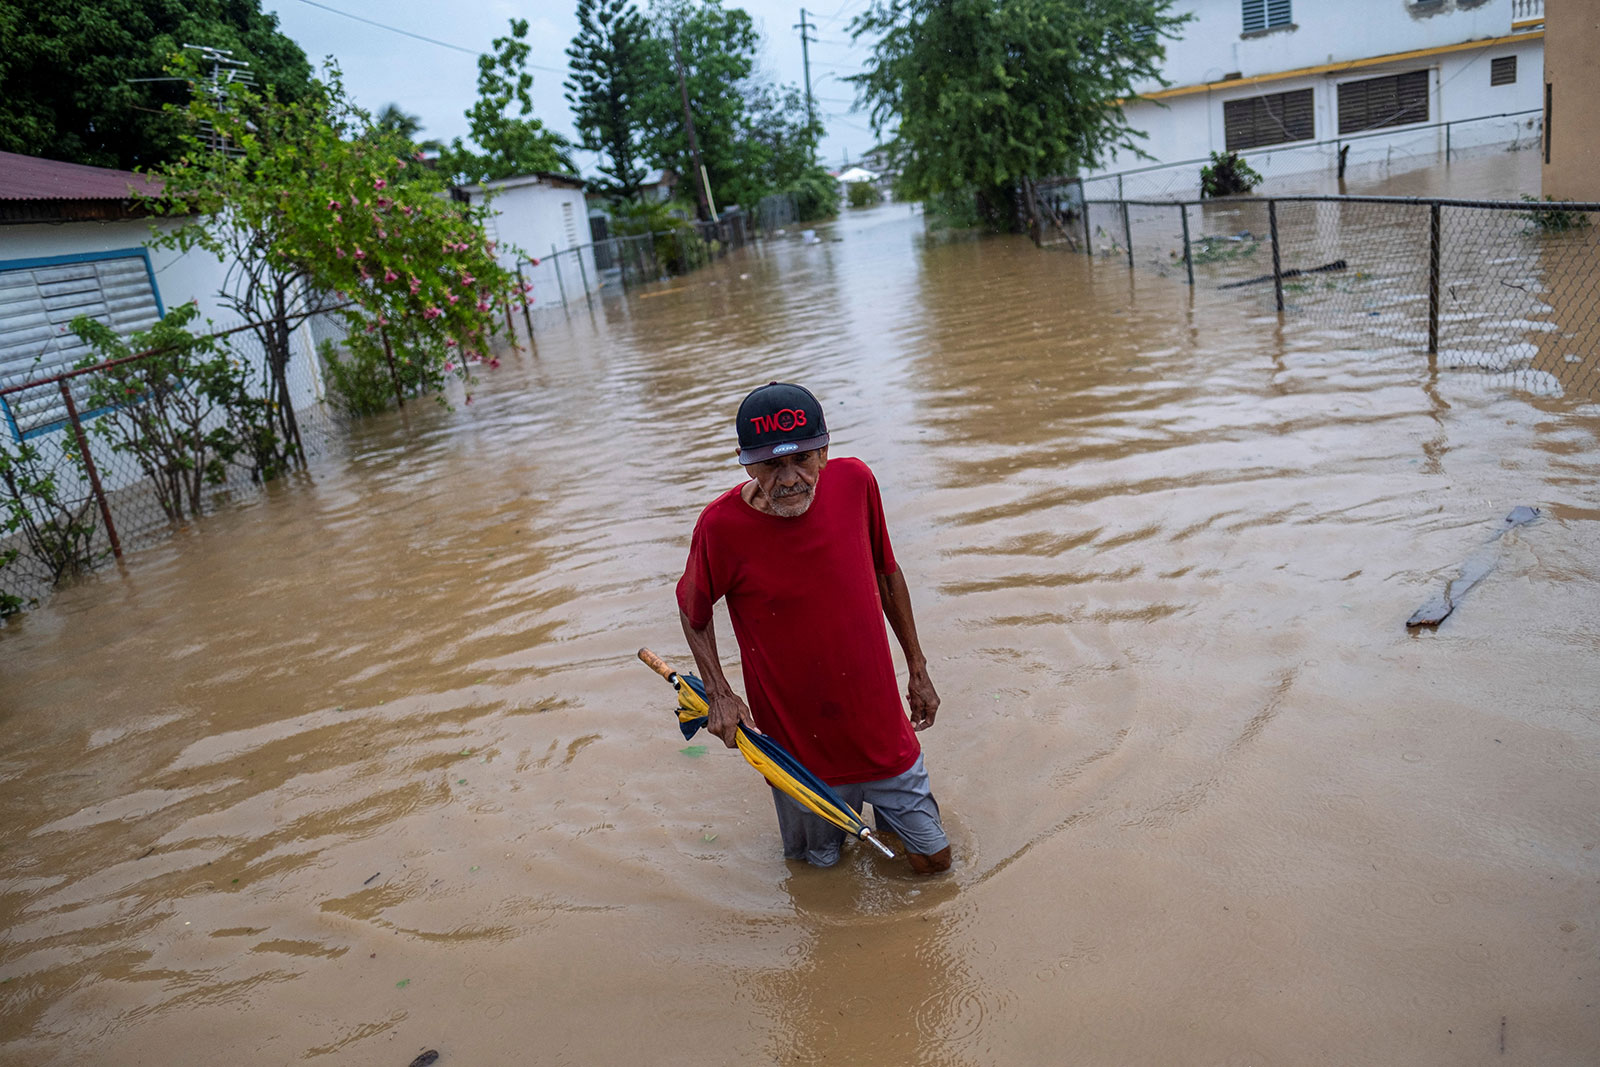 A man wades through water in a flooded street in the aftermath of Hurricane Fiona in Salinas, Puerto Rico on September 19. 